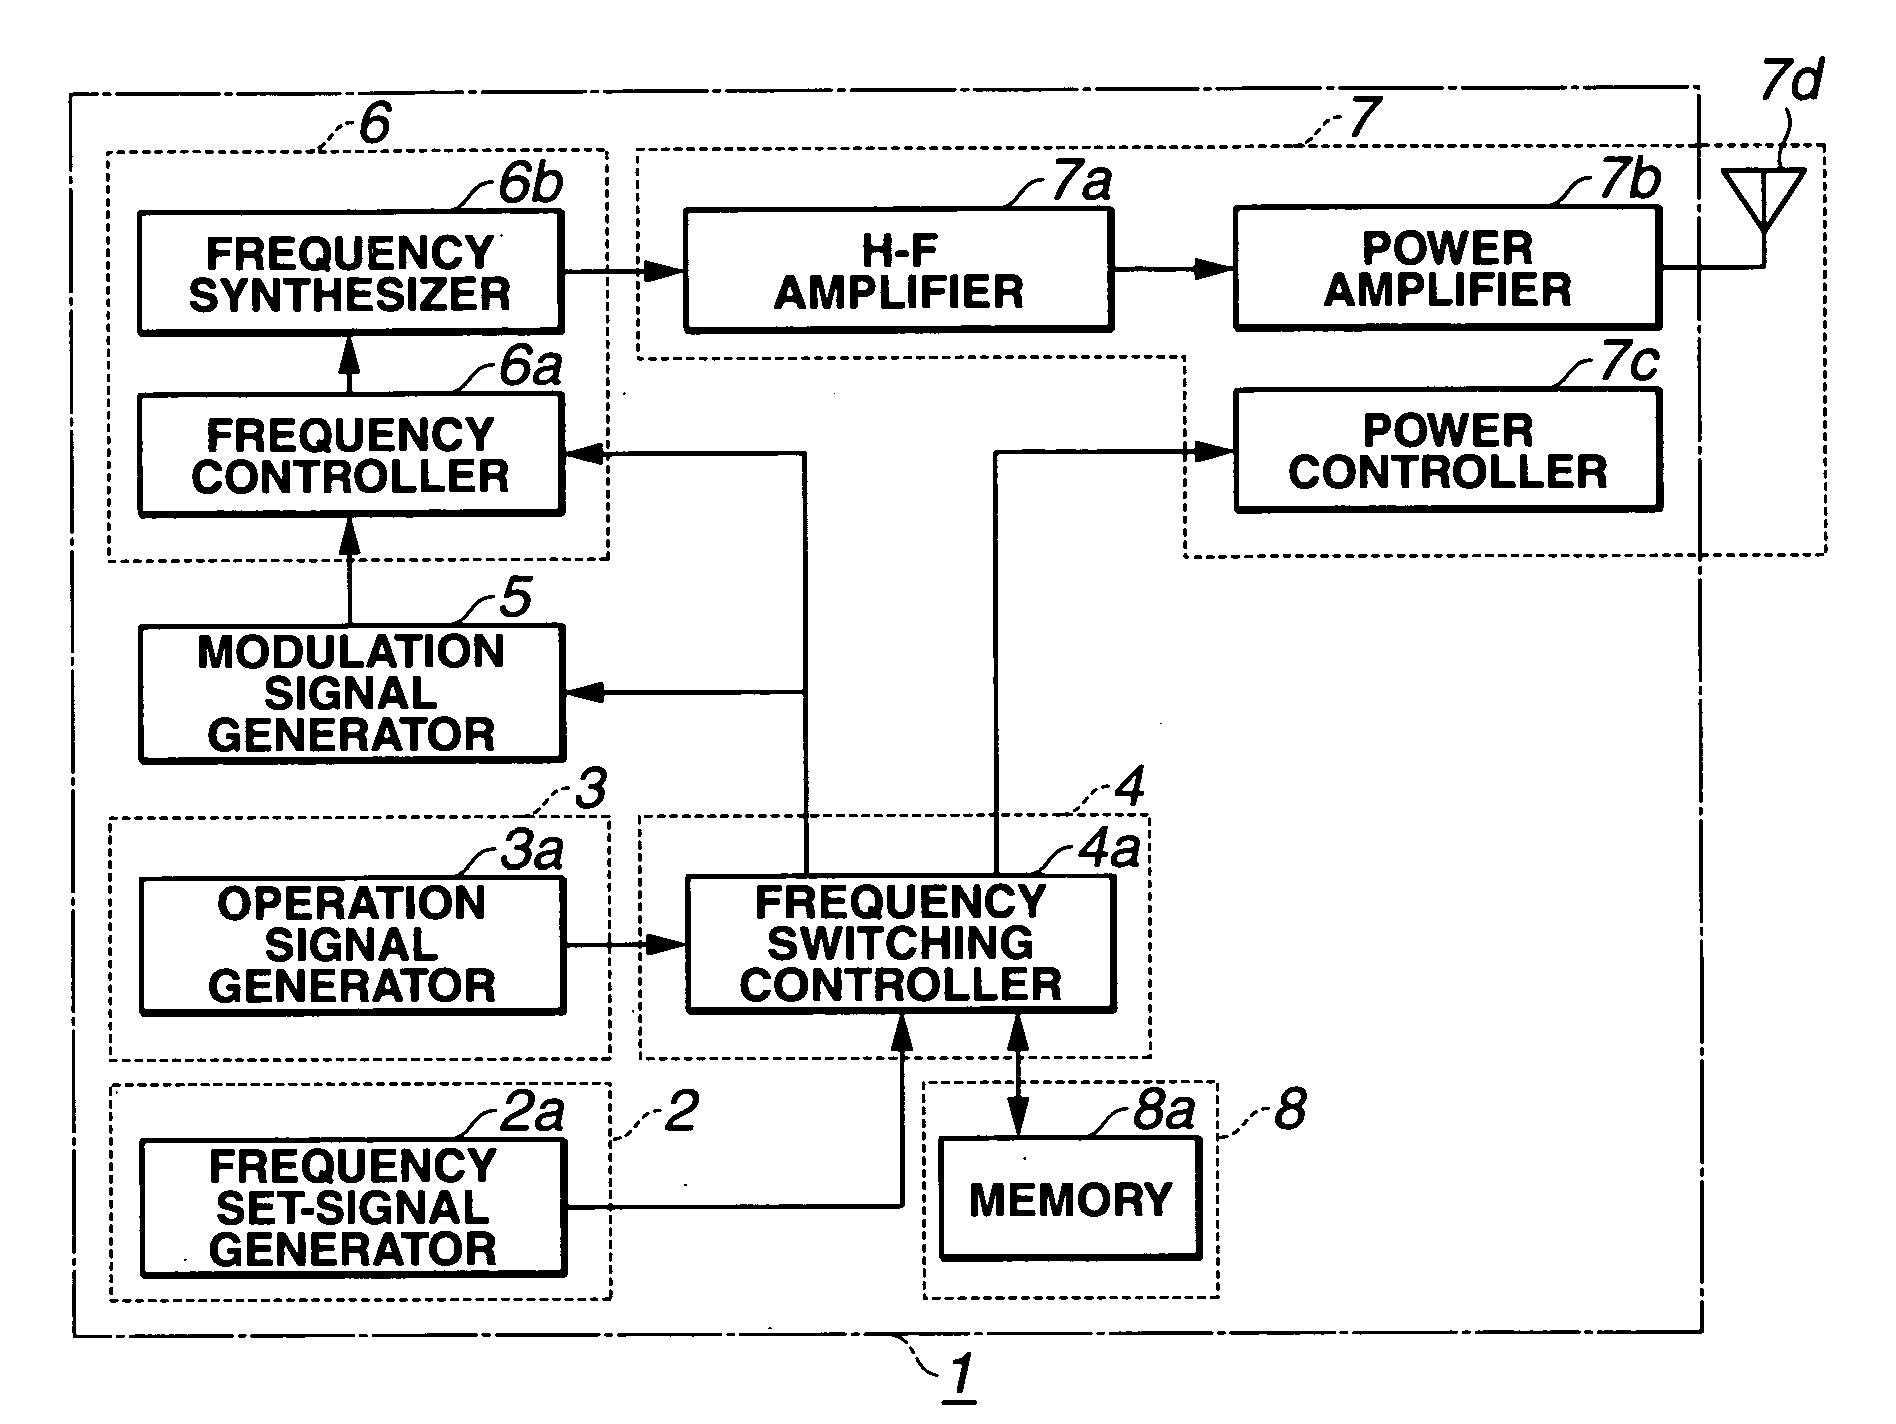 Radio control system for models